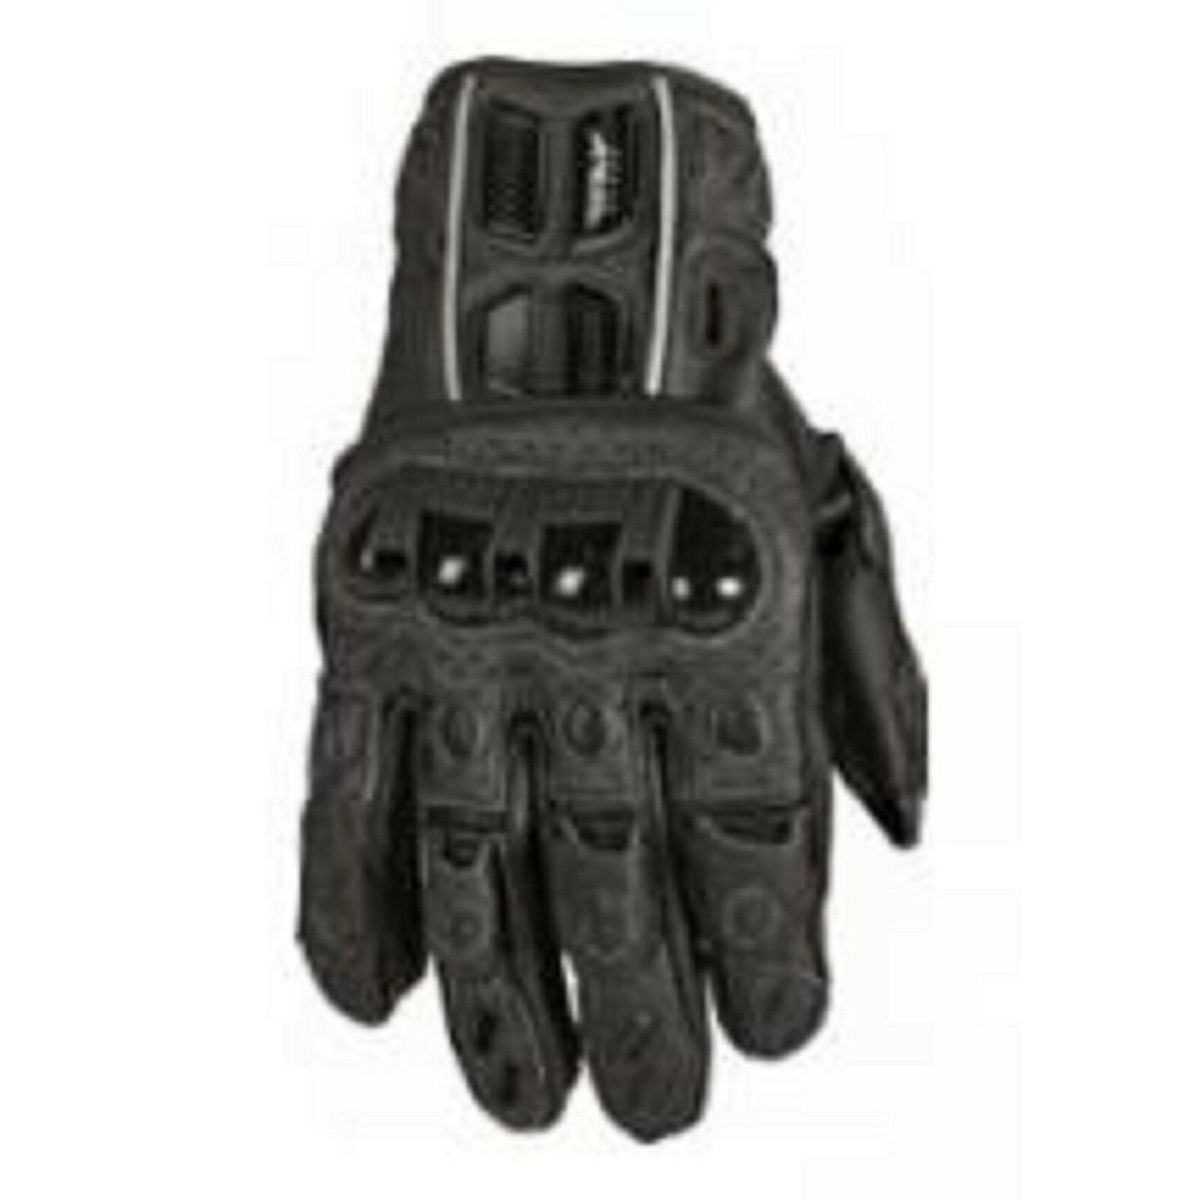 FLY RACING OPEN BOX MENS FL1 GLOVES BLACK 476-2020S SIZE S